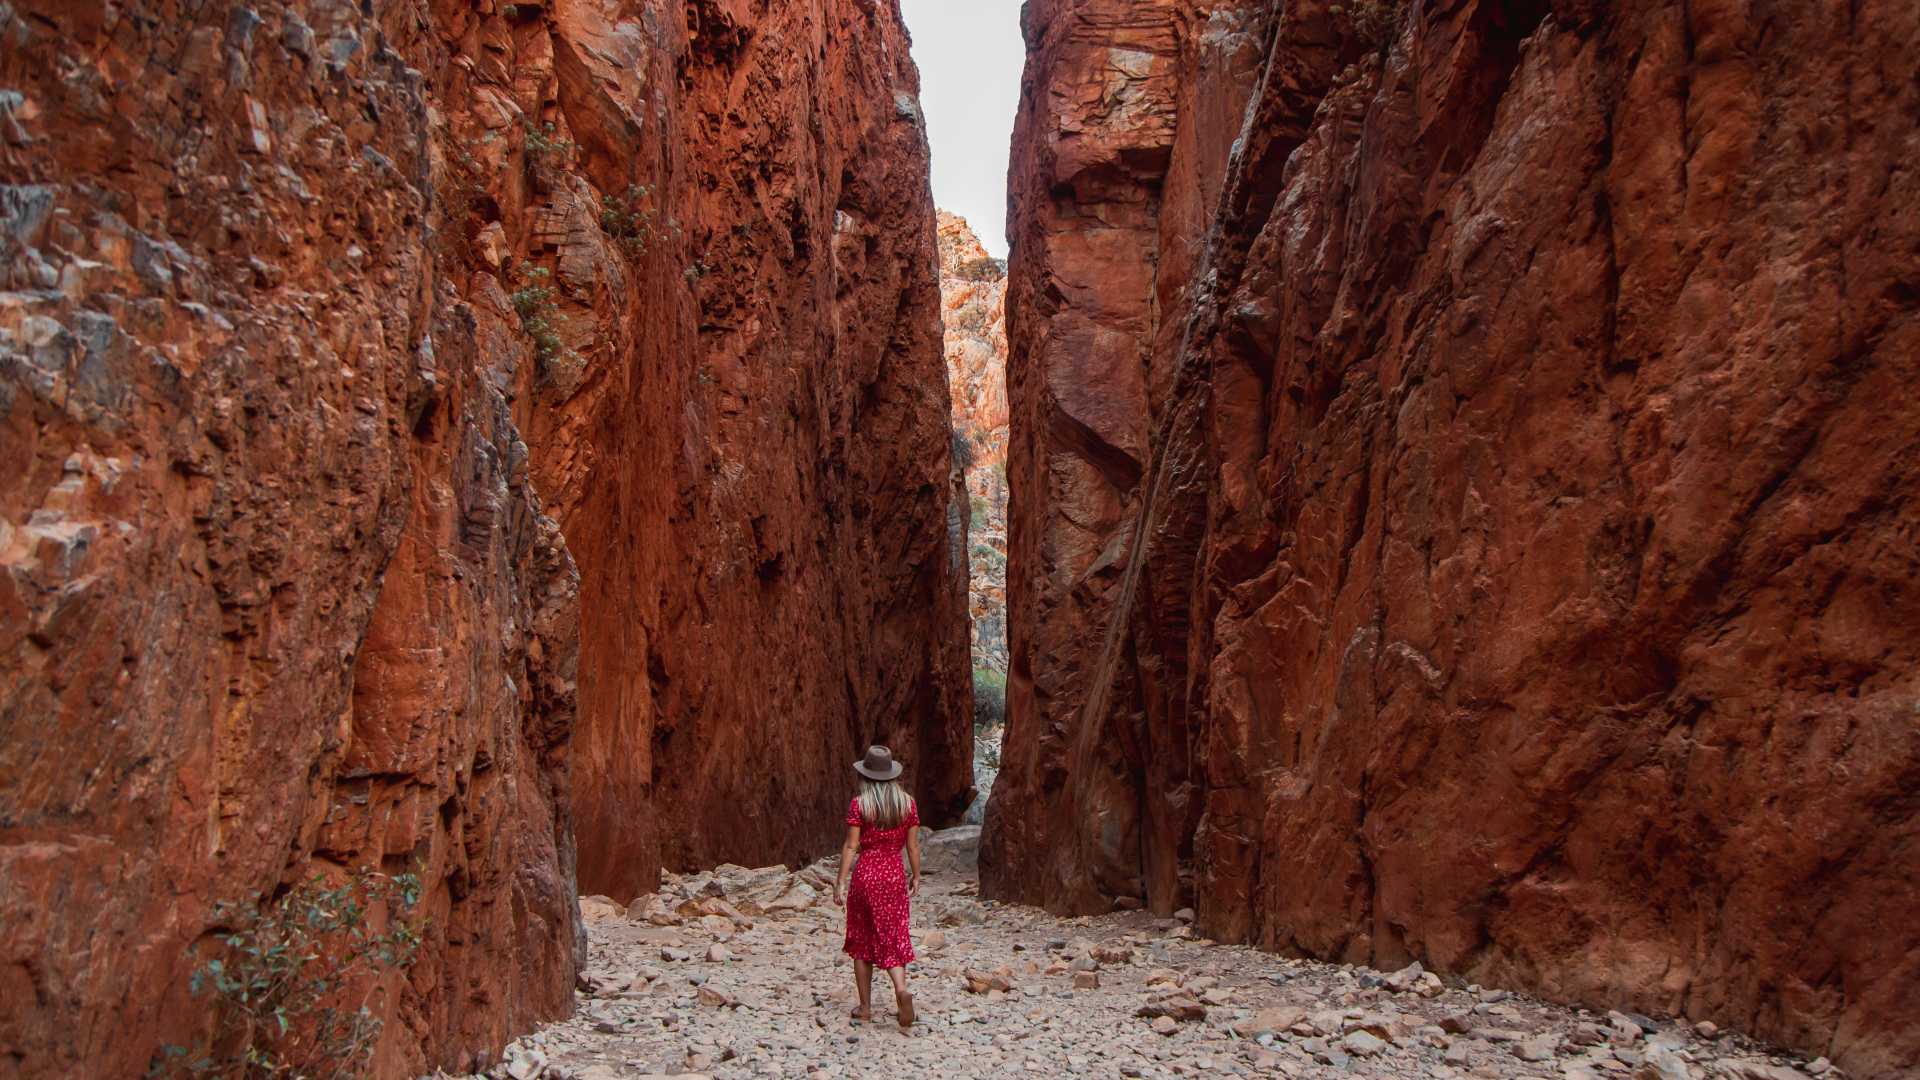 Standley Chasm Cultural Experience Tour